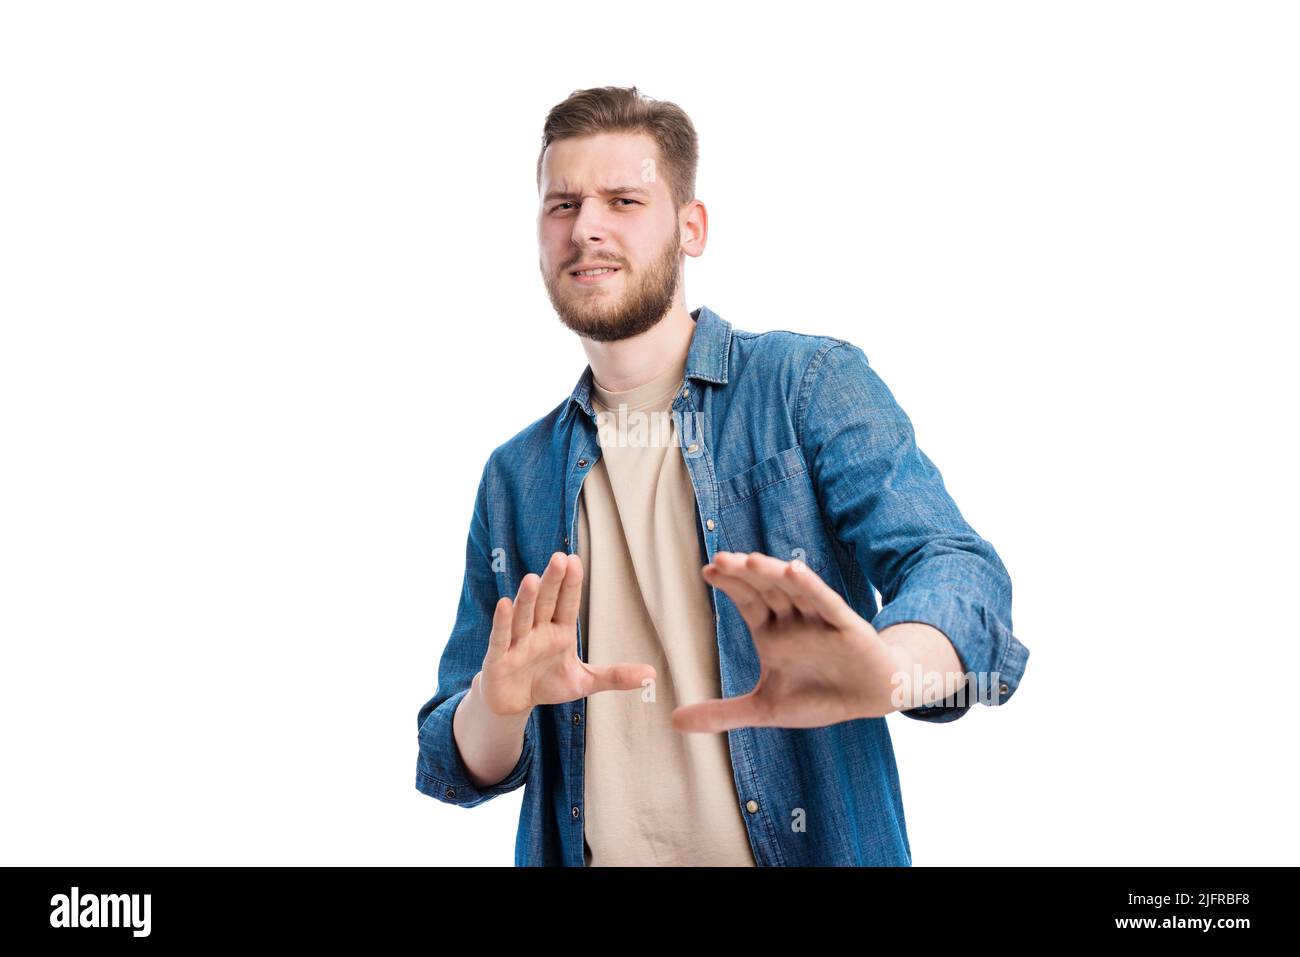 Dissatisfied man showing rejection Stock Photo